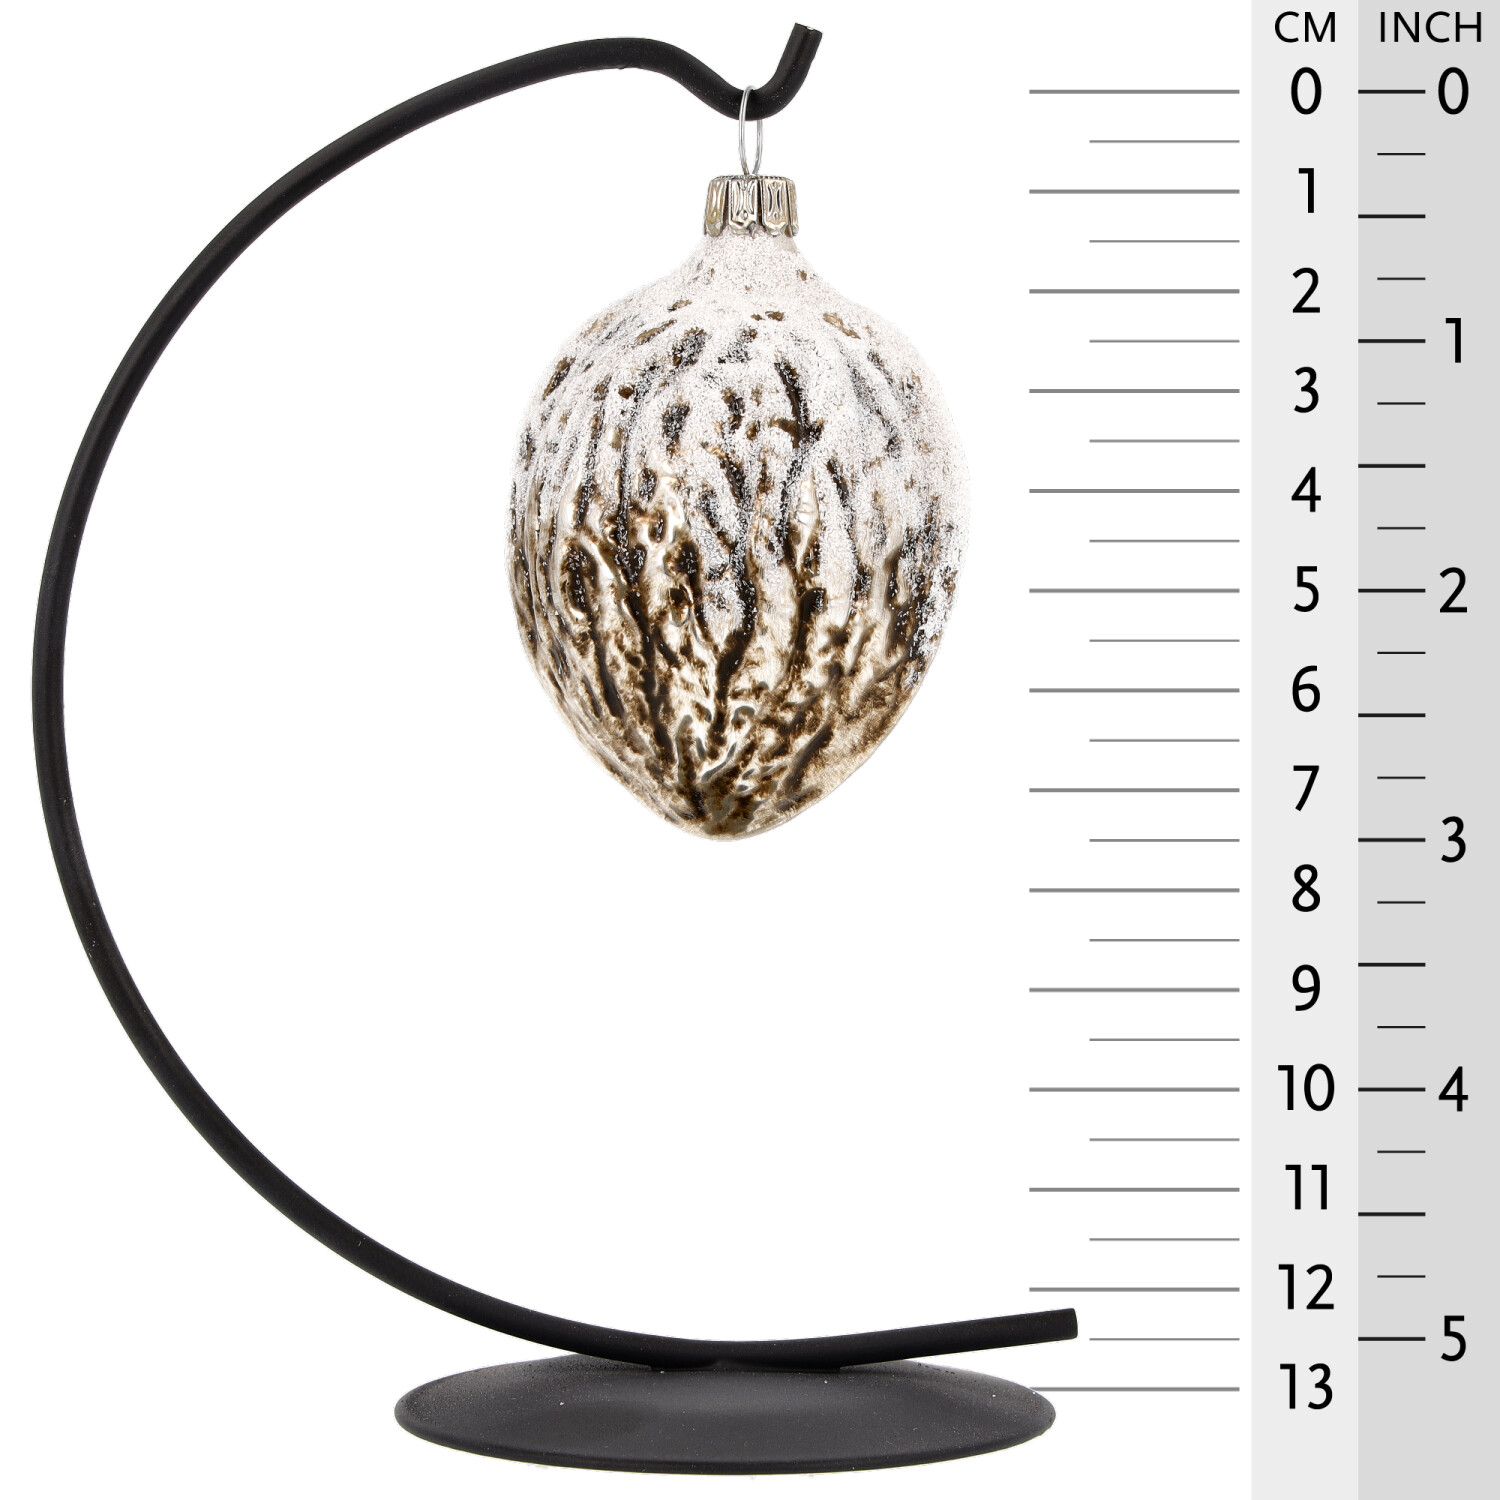 Retro Vintage style Christmas Glass Ornament - Large Walnut with glass mica